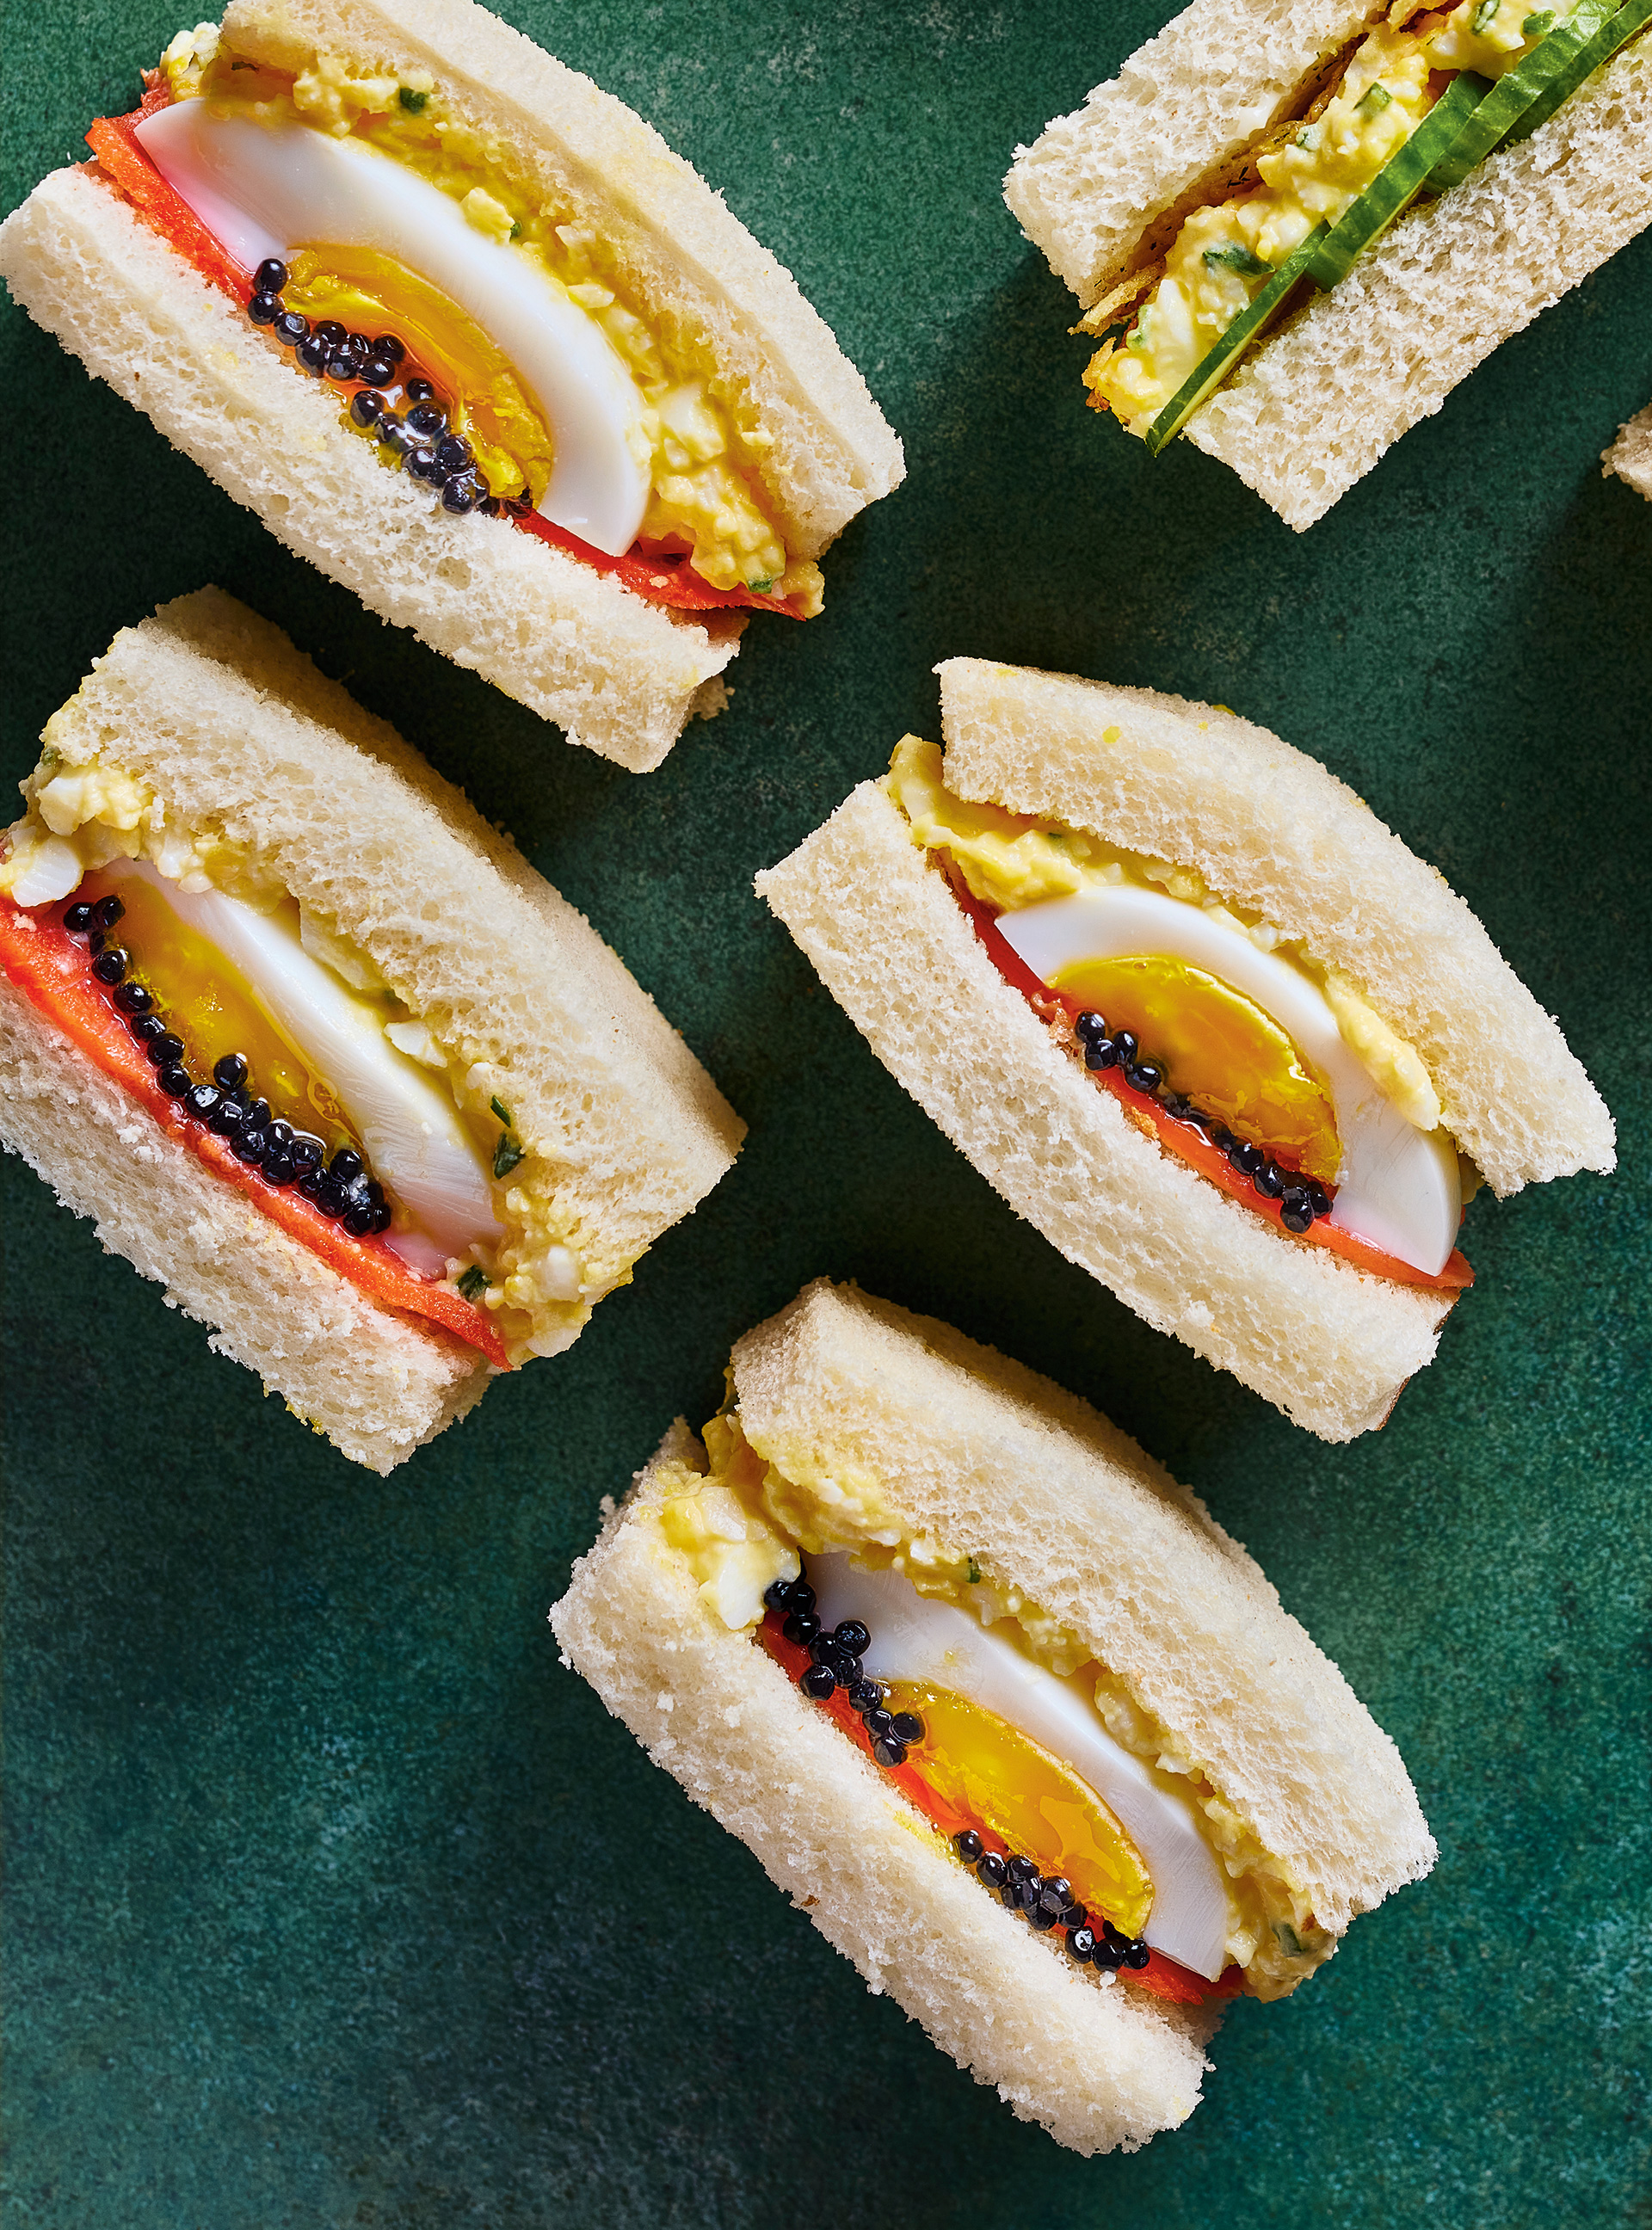 Egg, Smoked Salmon and Fish Roe Sandwiches